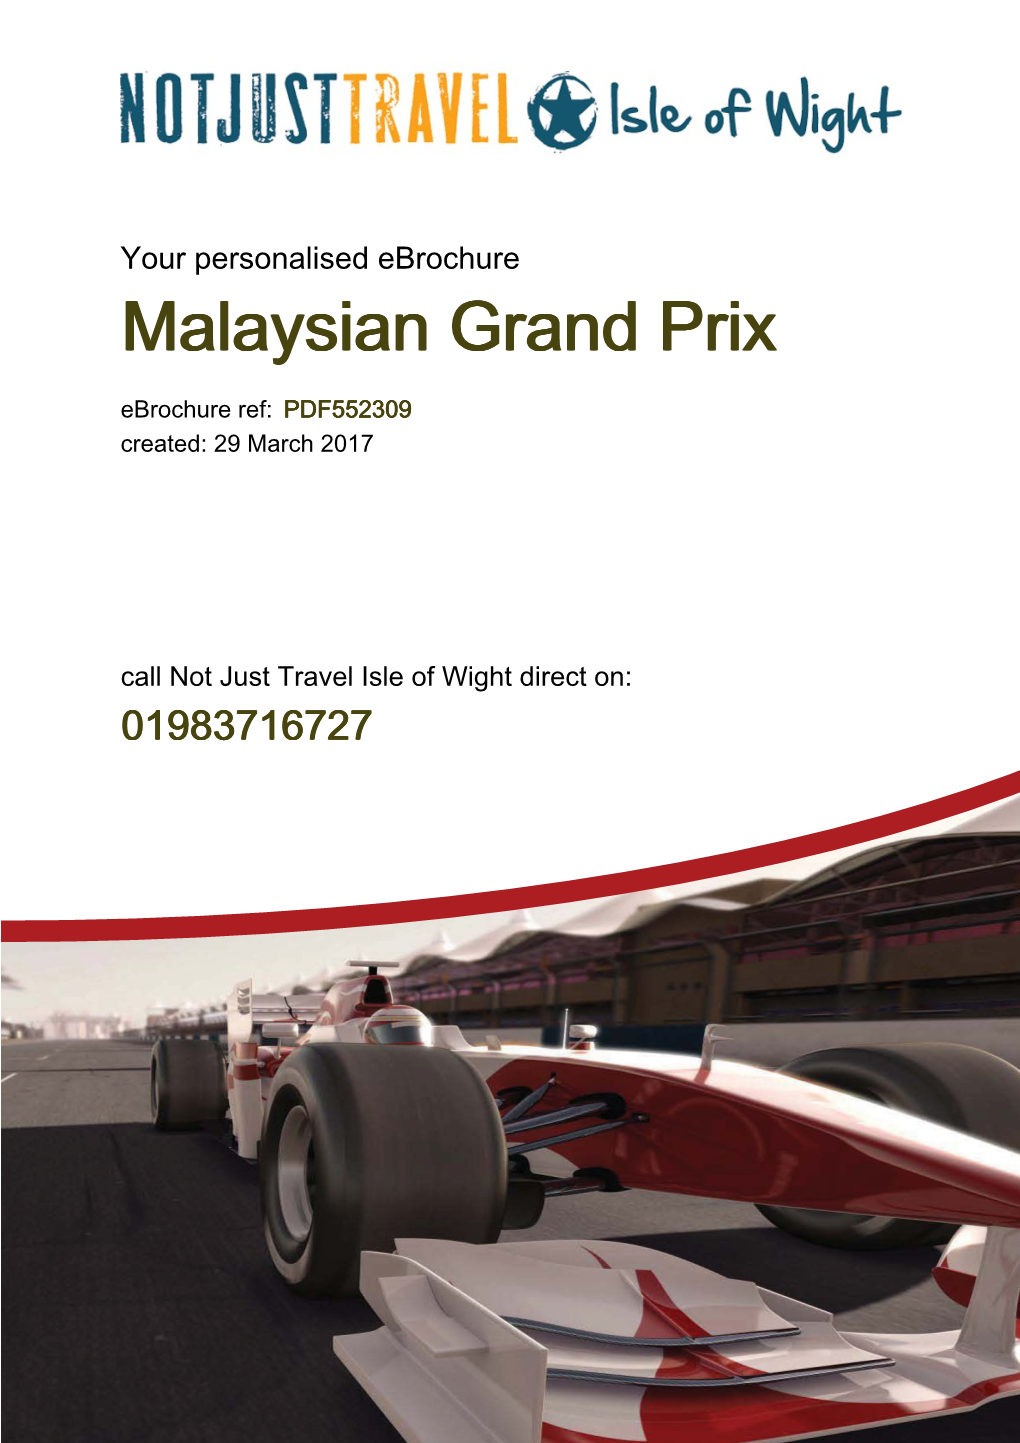 Malaysian Grand Prix Ebrochure Ref: PDF552309 Call Not Just Travel Isle of Wight Direct on 01983716727